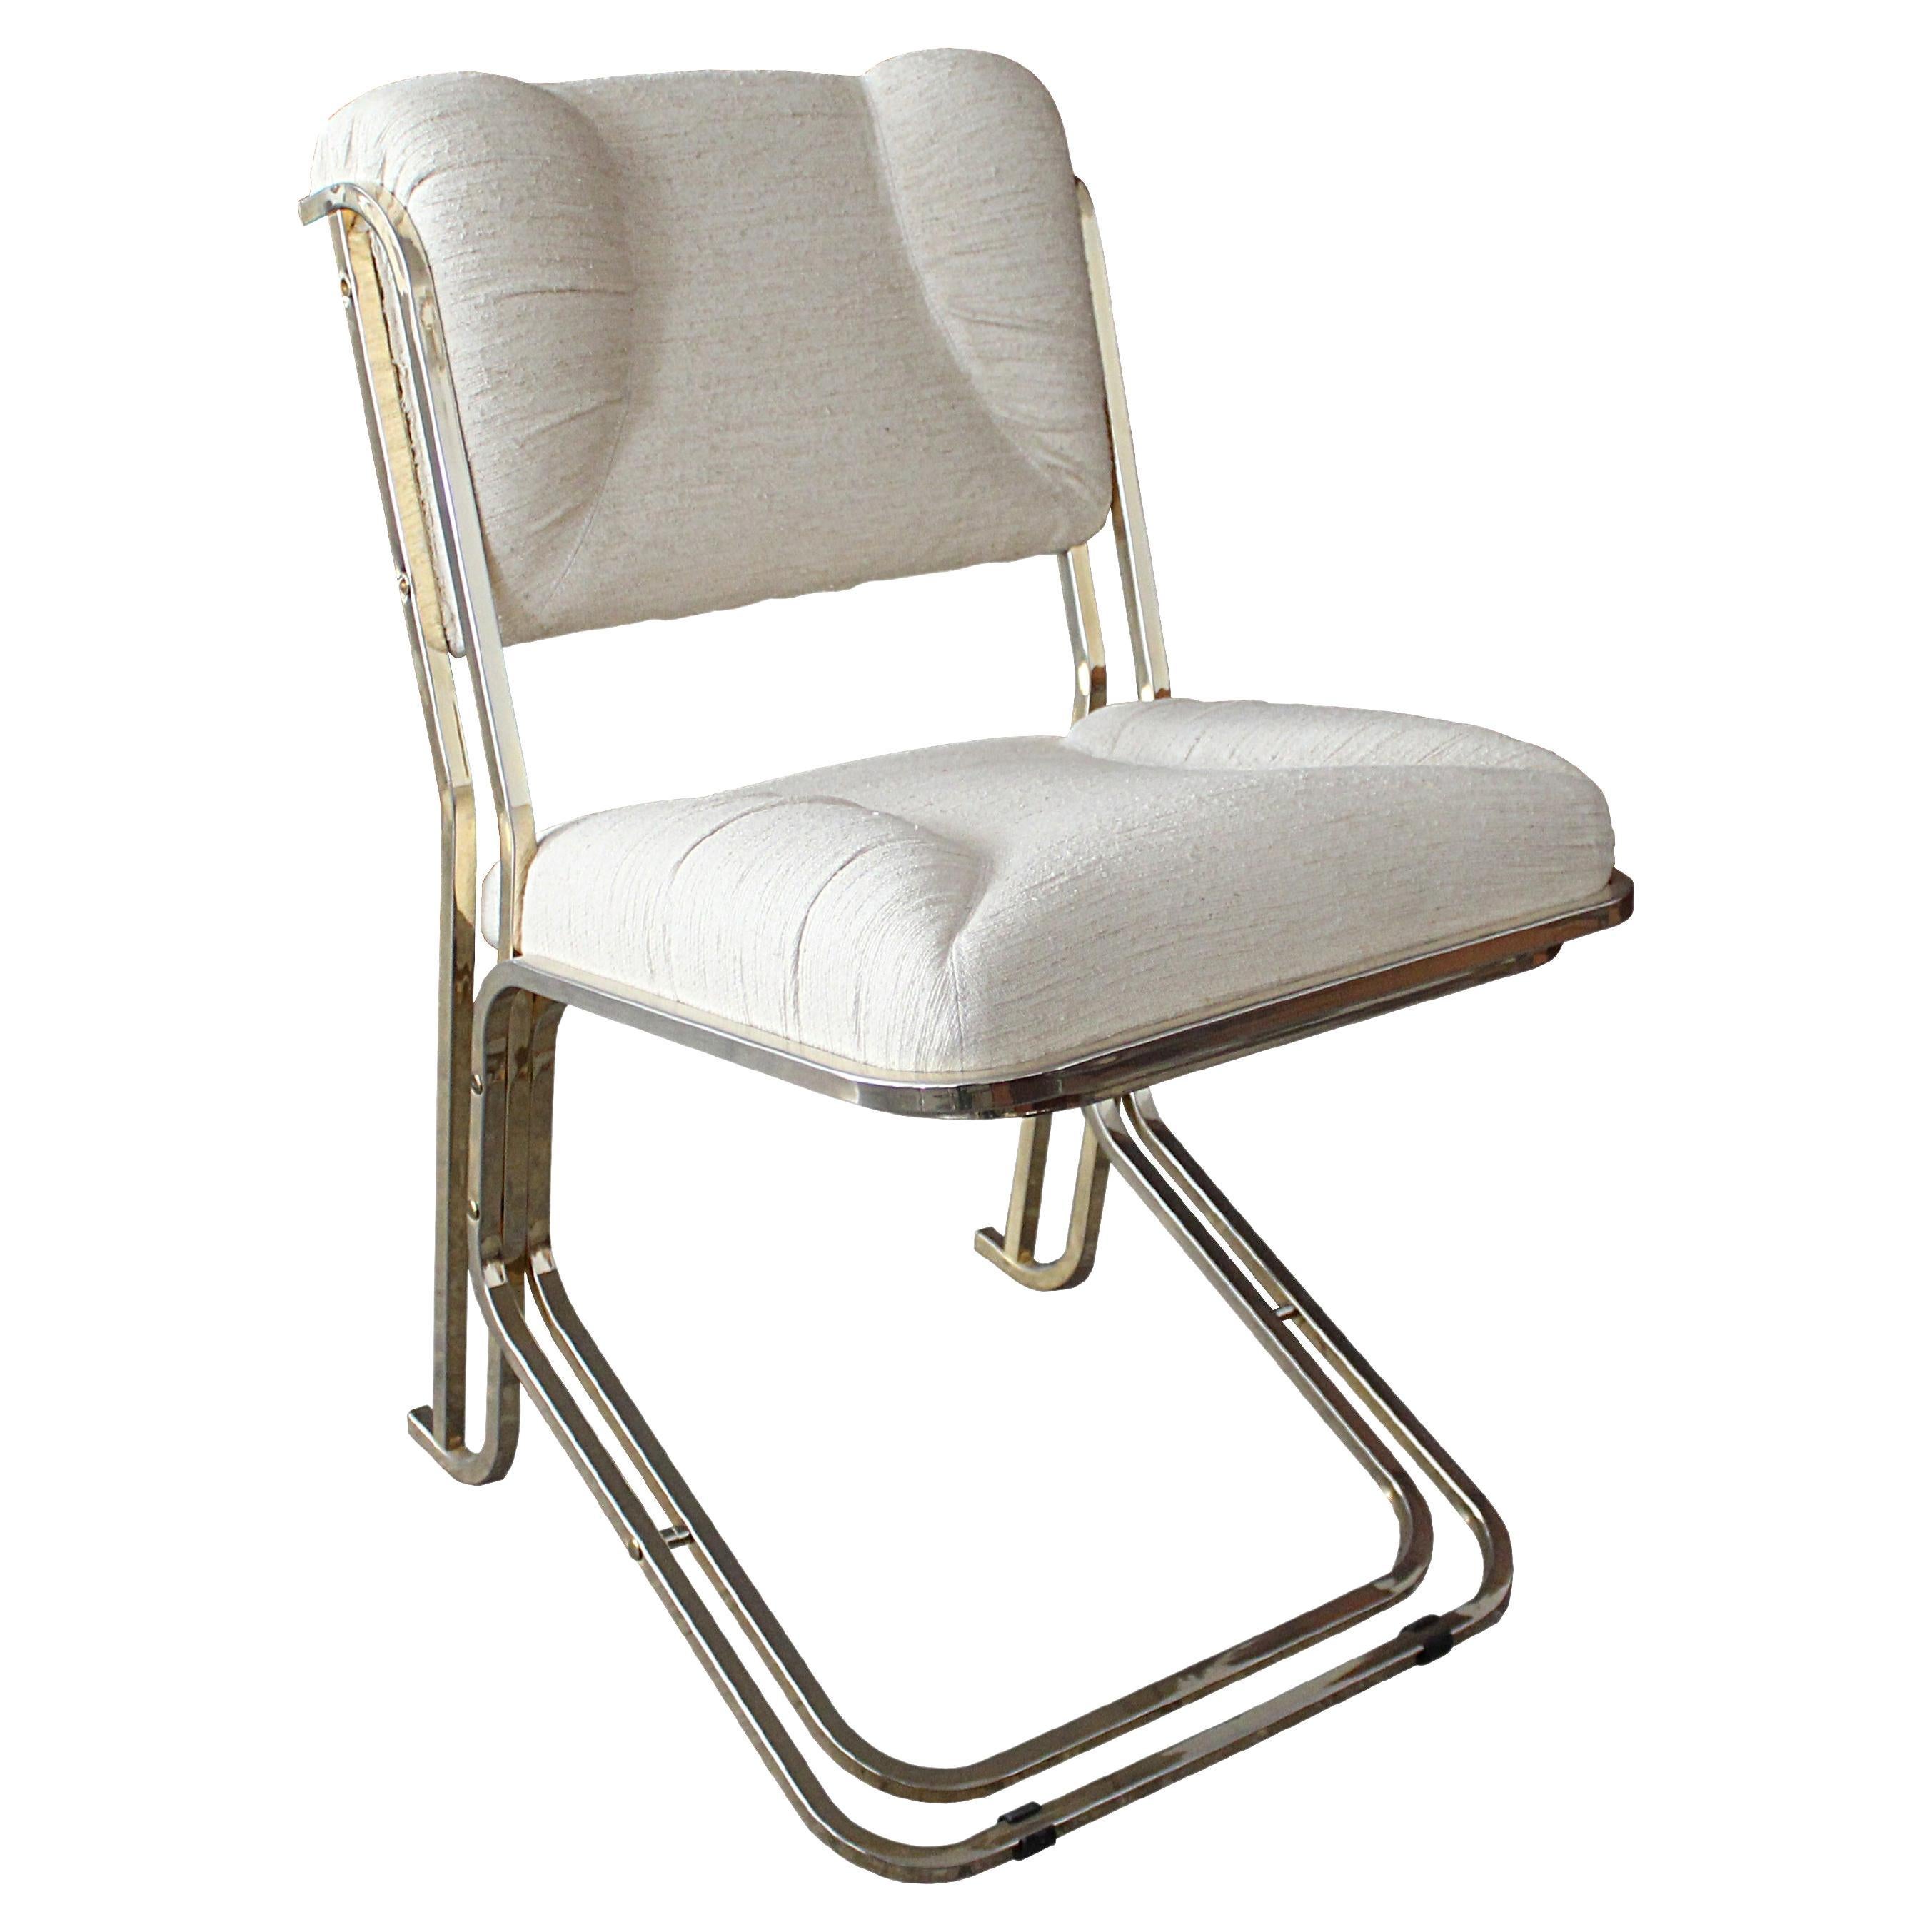 21st Century Swan Chair, Freelife Padded Fabric and Satin Brass, Made in Italy